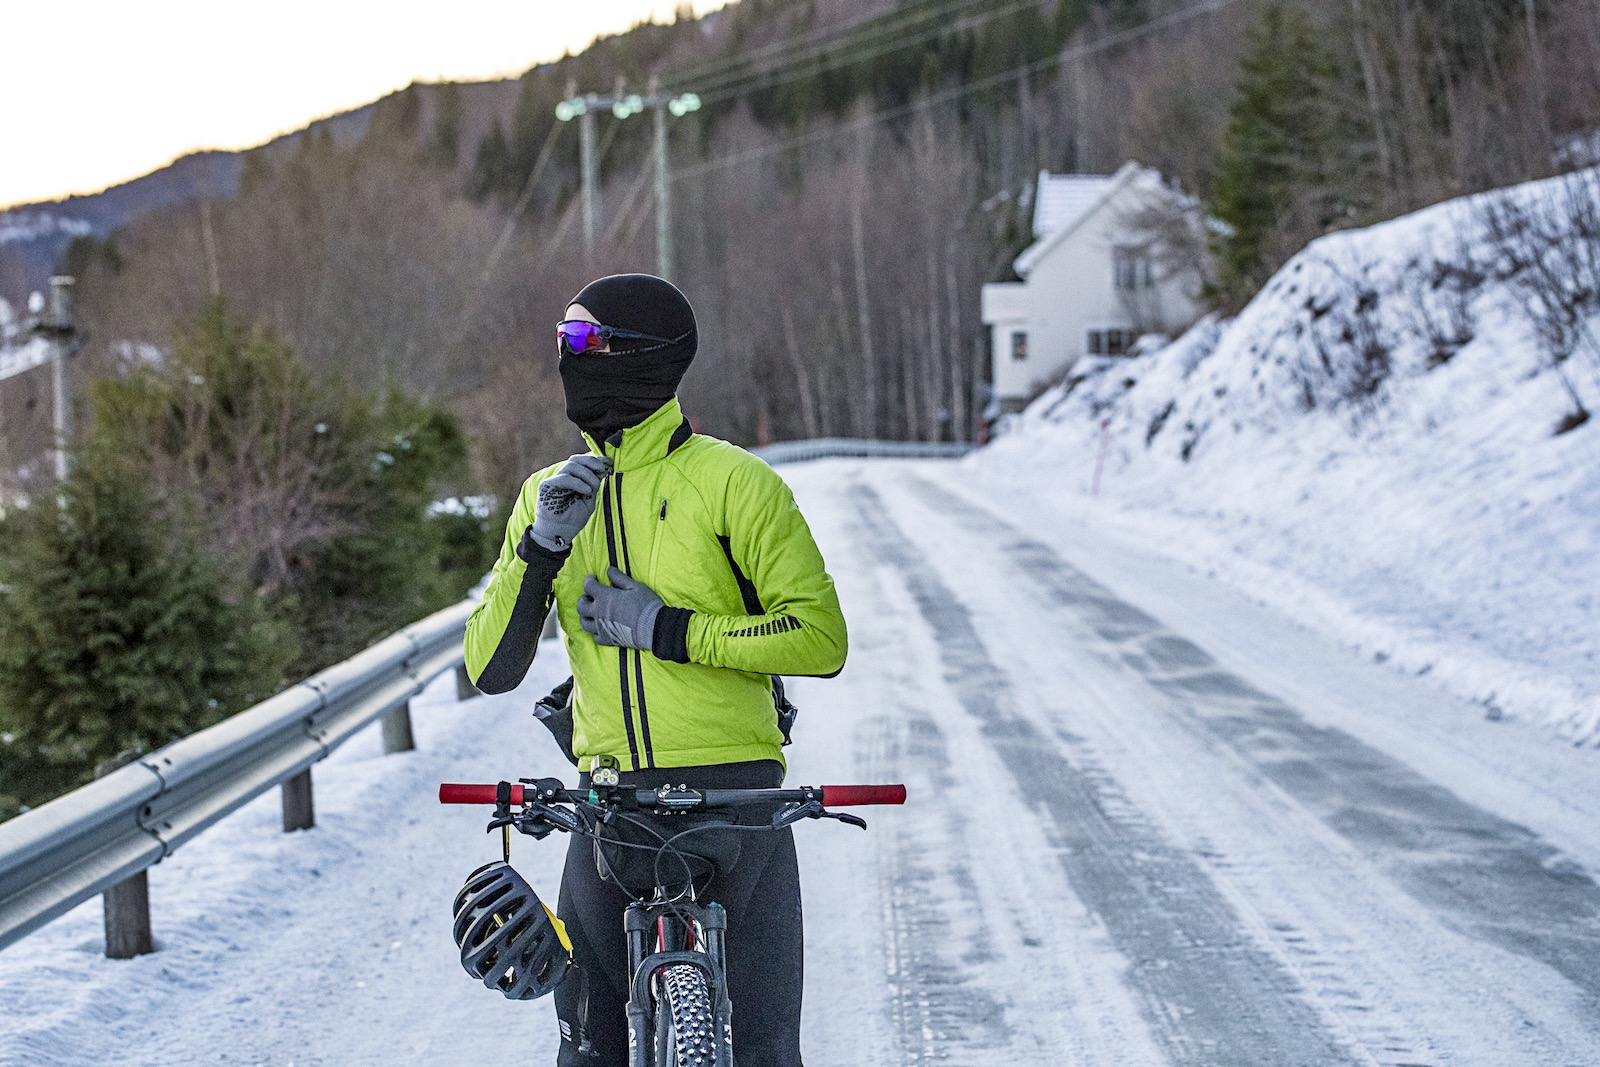 Kit Tips – A Guide to Cold Weather Winter Cycle Clothing